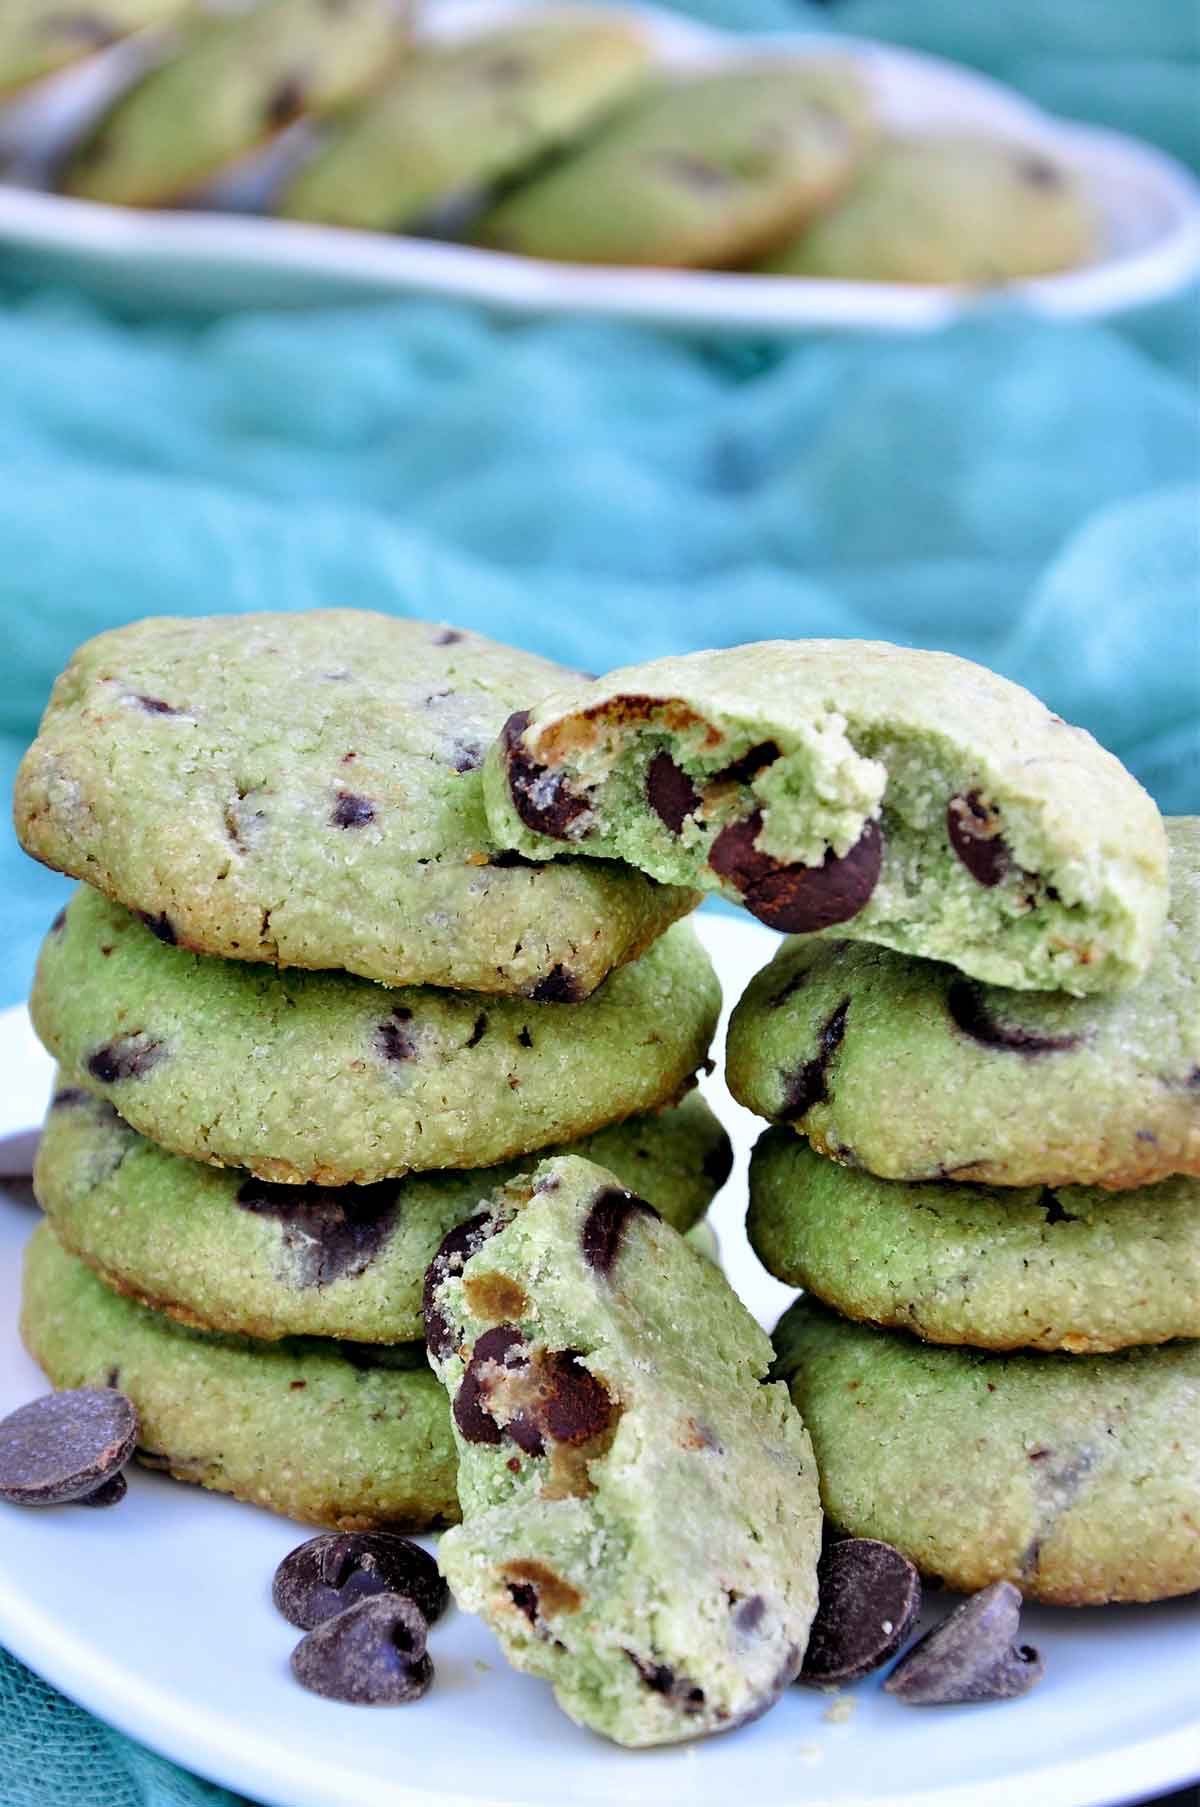 Matcha green tea cookies stacked in a plate.